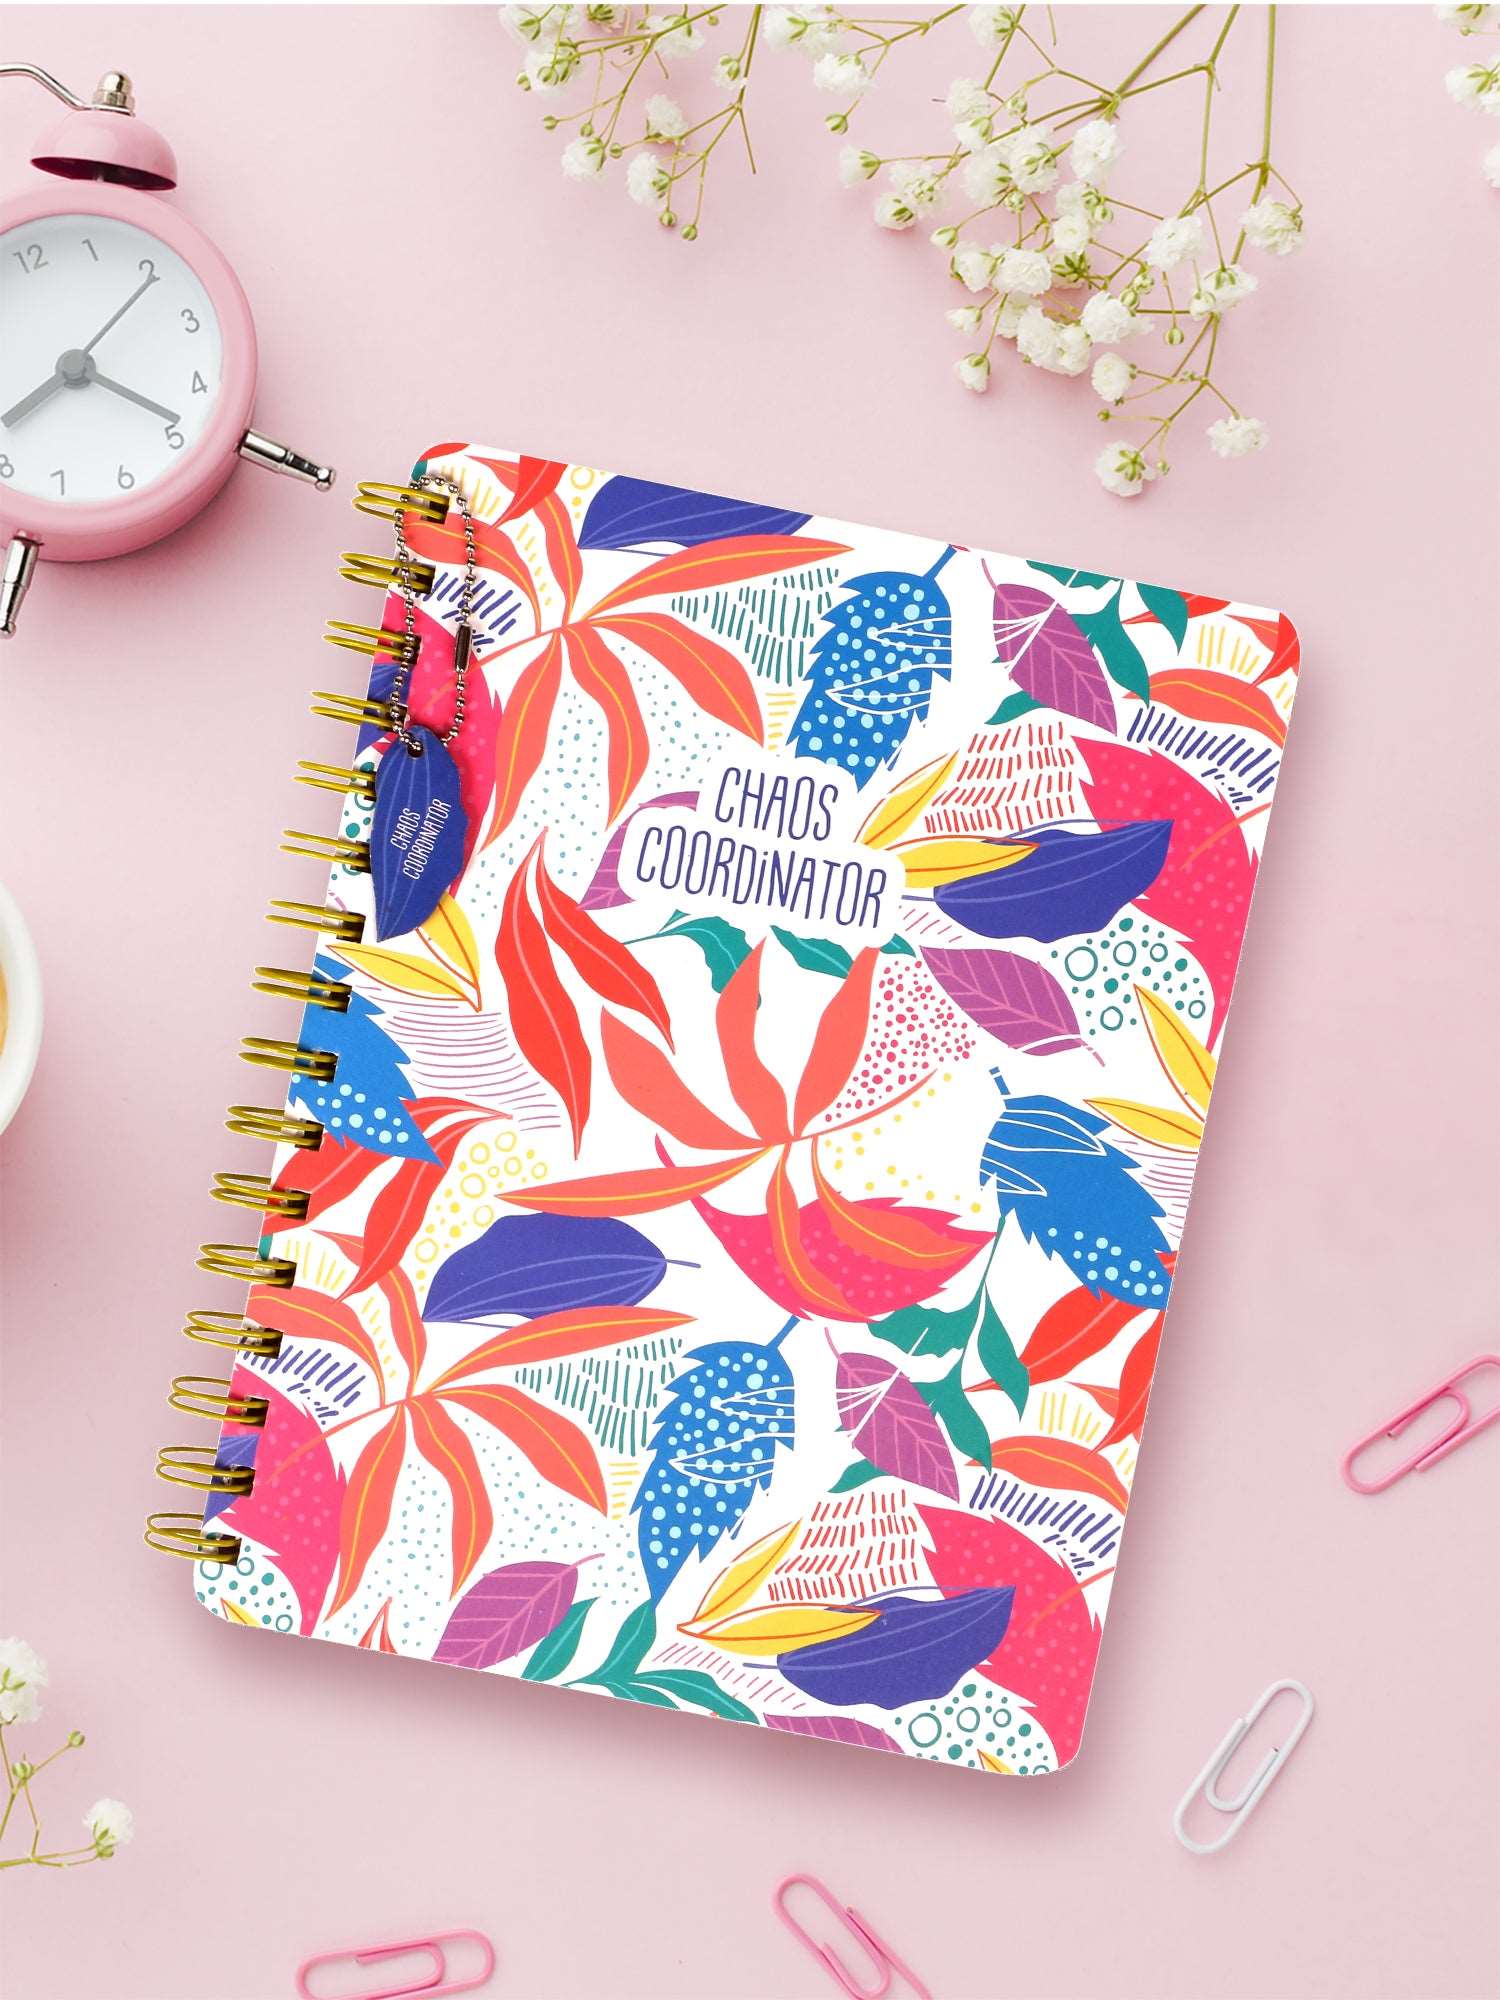 Doodle Chaos Coordinator Hard Bound B5 Notebook - DoodleCollection Store